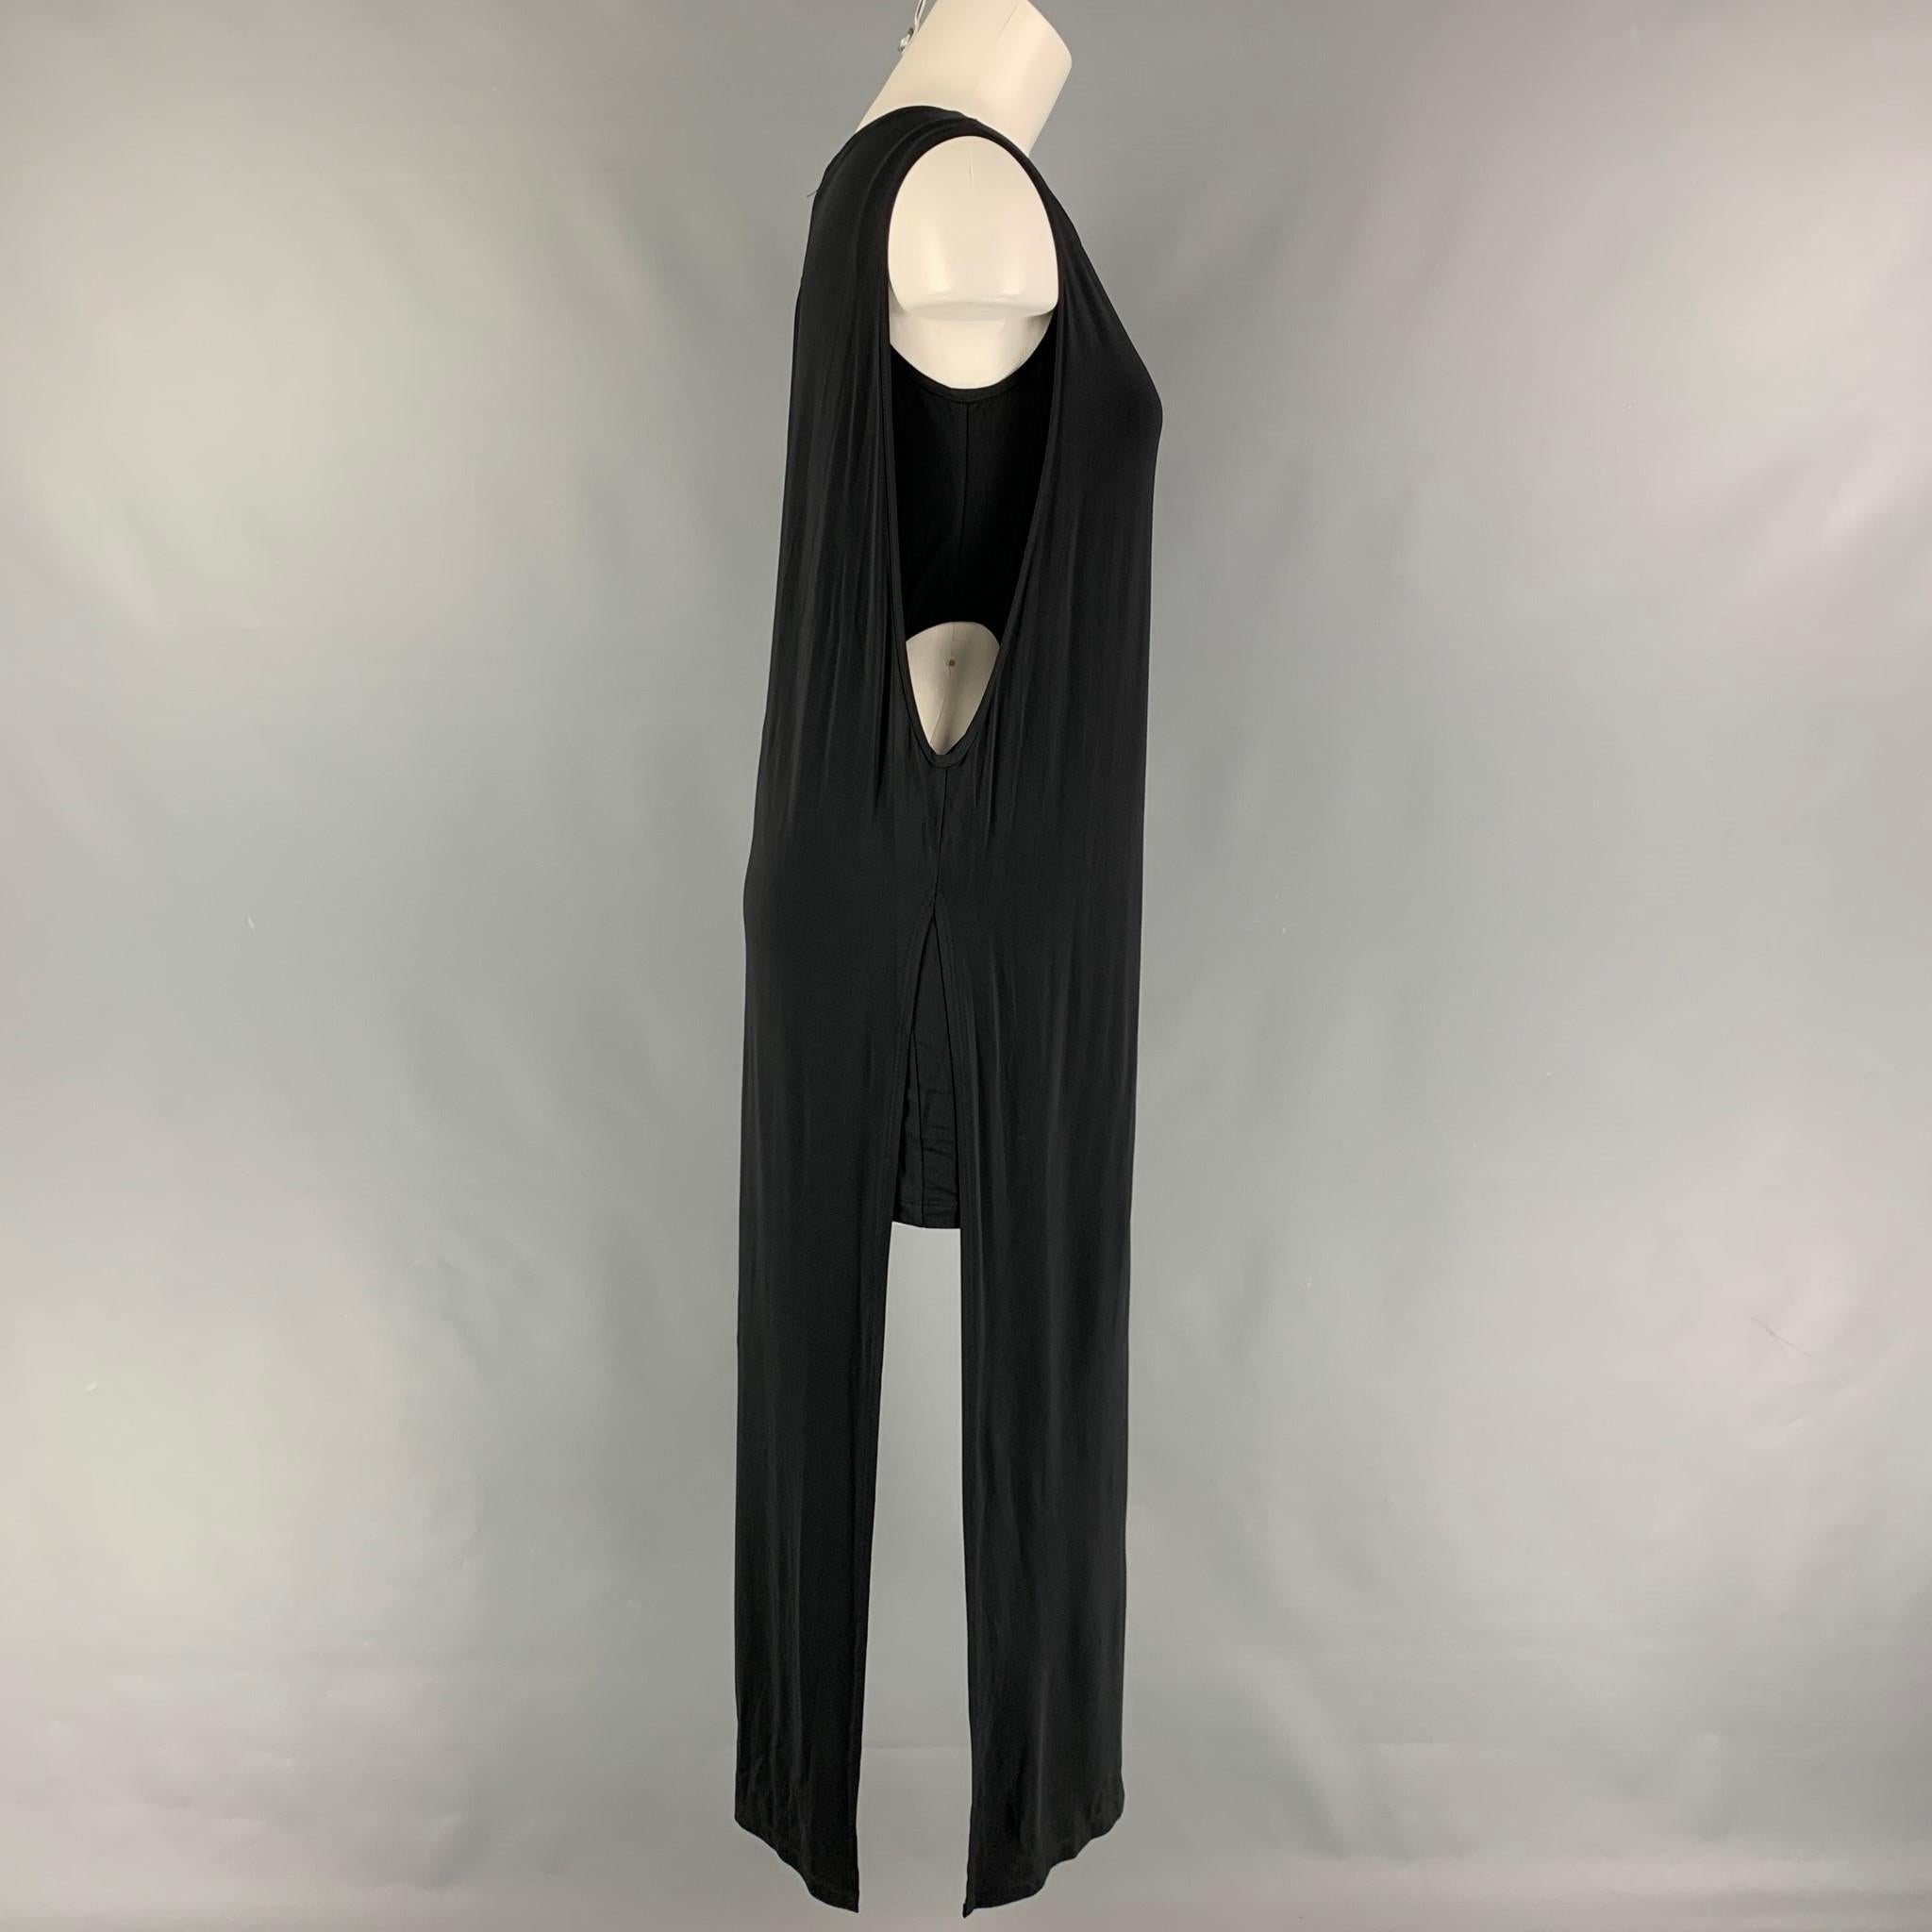 HELMUT LANG dress comes in a black jersey featuring a shift style, sleeveless, back cut-out detail, and a high slit design. 

New With Tags. 
Marked: S
Original Retail Price: $425.00

Measurements:

Shoulder: 15 in.
Bust: 34 in.
Length: 49.5 in.